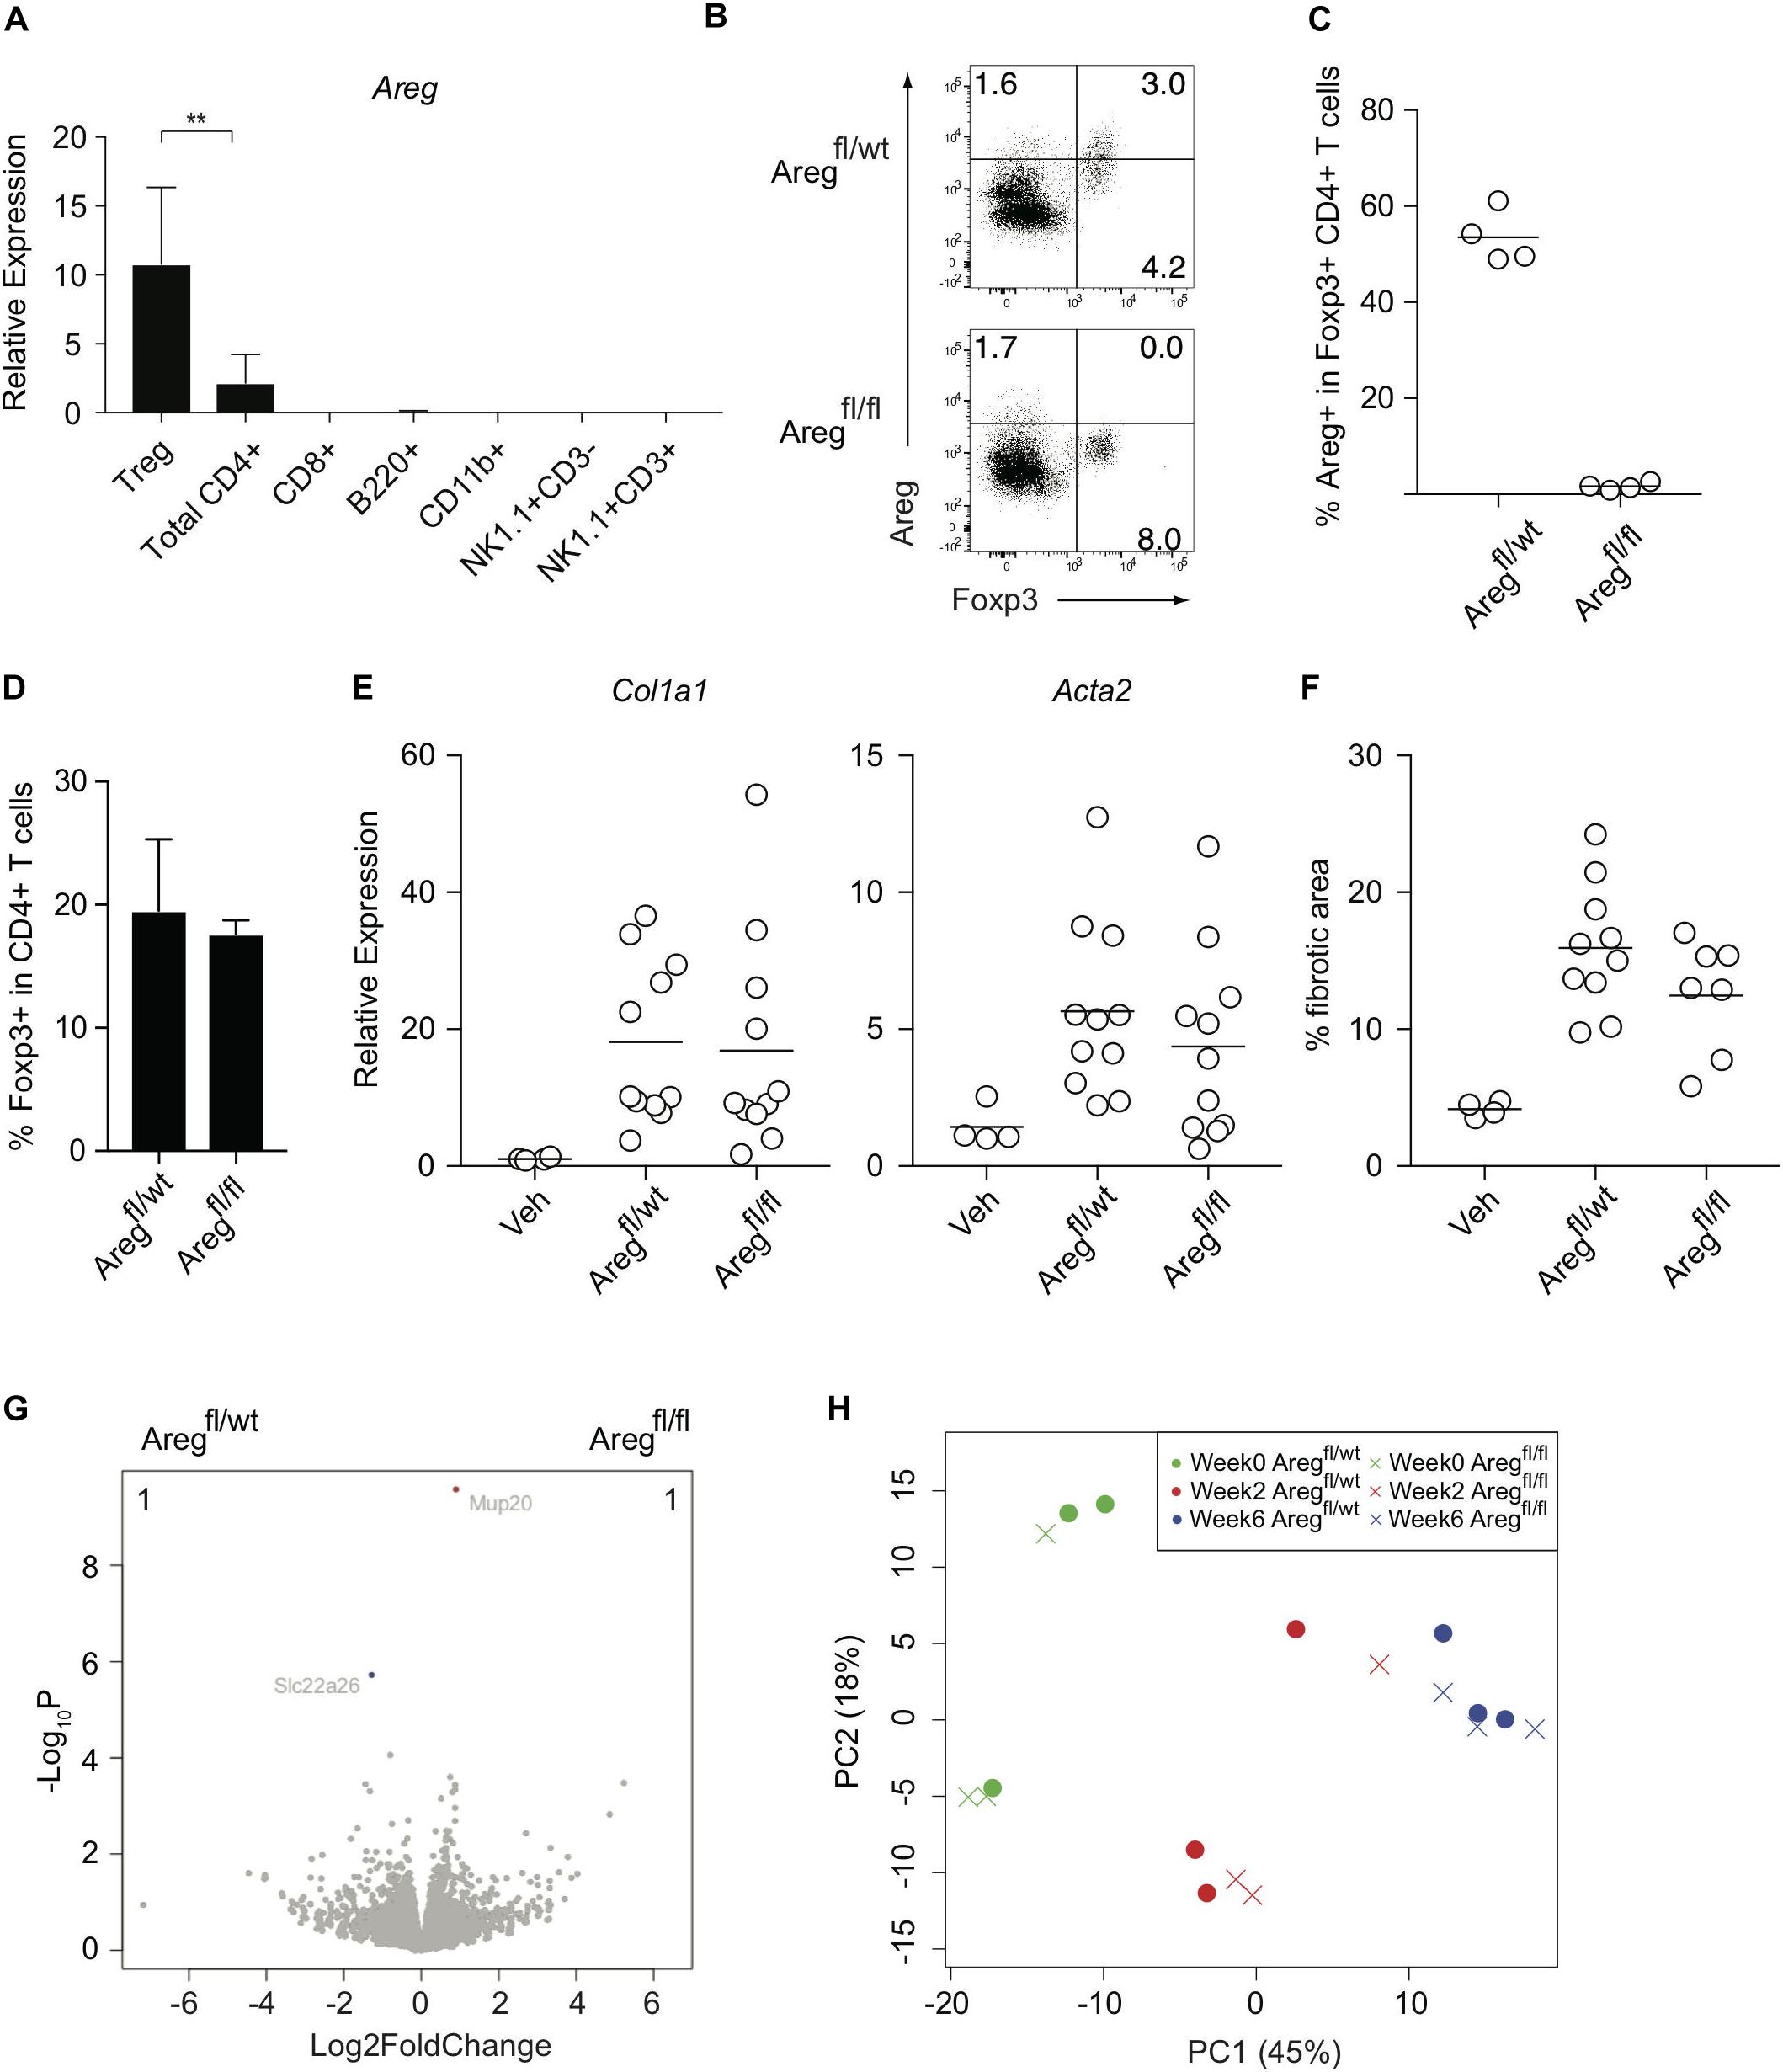 Frontiers Foxp3 Regulatory T Cells Inhibit Ccl4 Induced Liver Inflammation And Fibrosis By Regulating Tissue Cellular Immunity Immunology